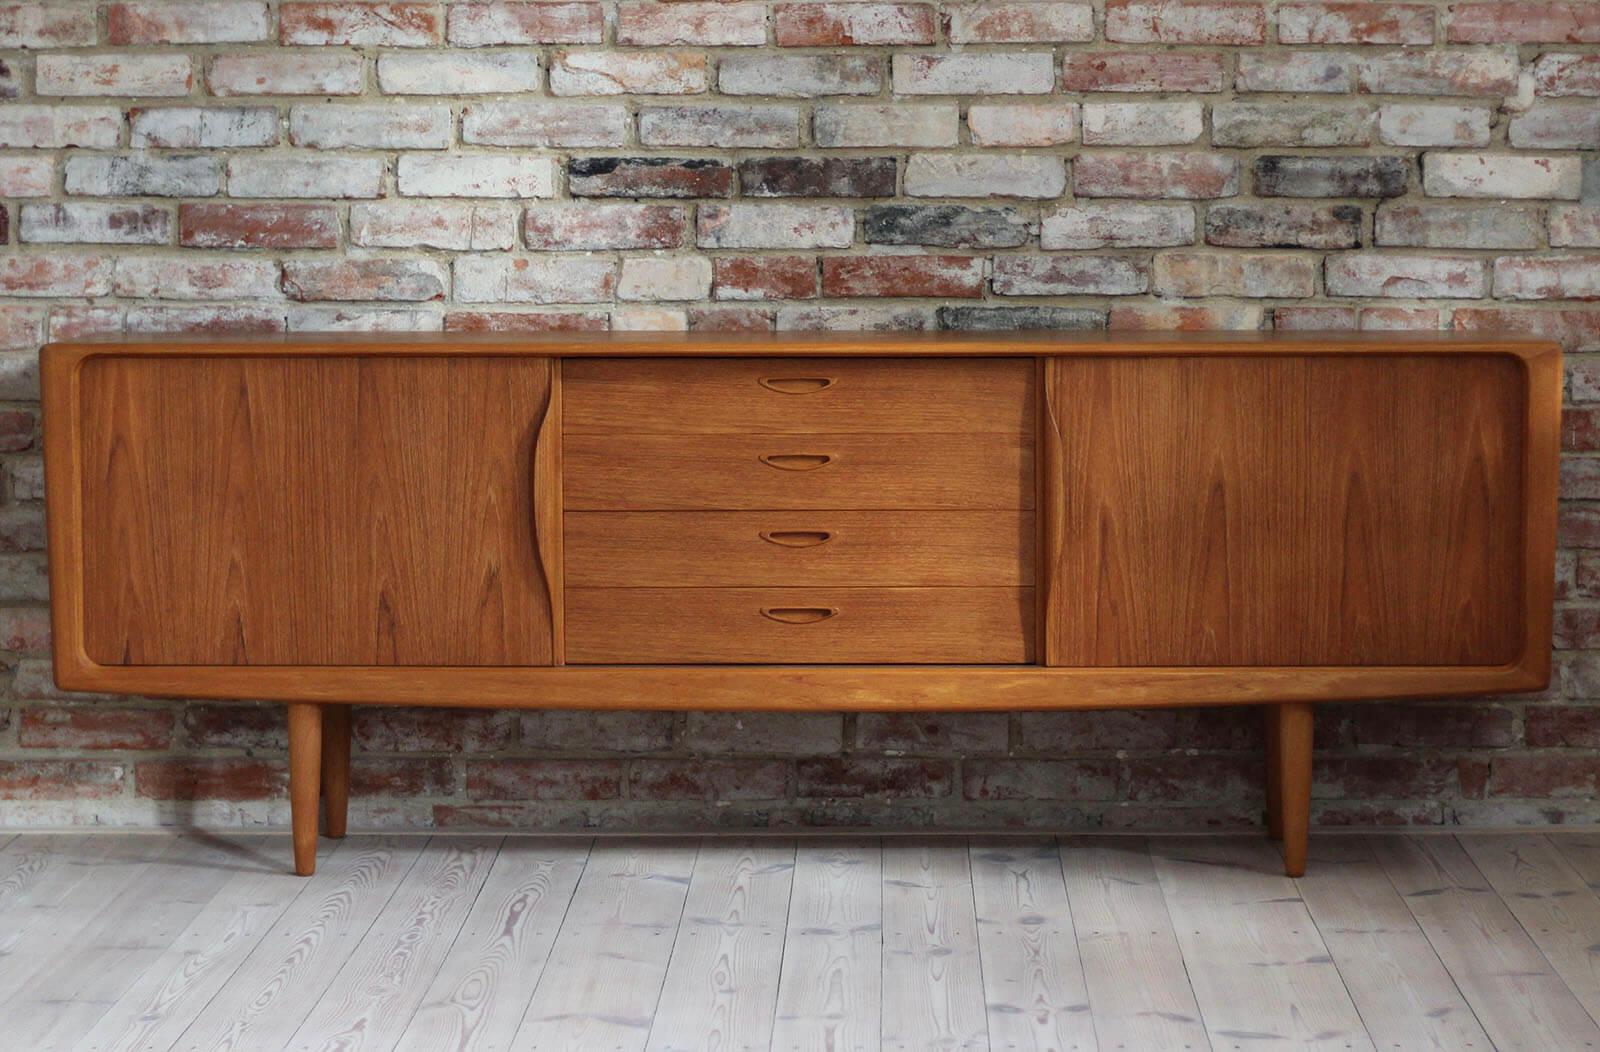 This is a quite rare sideboard designed by Norwegian designer Henry Walter Klein. It was manufactured by Bramin Furniture Factory in Denmark around 1960s. The piece features two sliding doors that reveal lots of storage space, each one with a shelf.